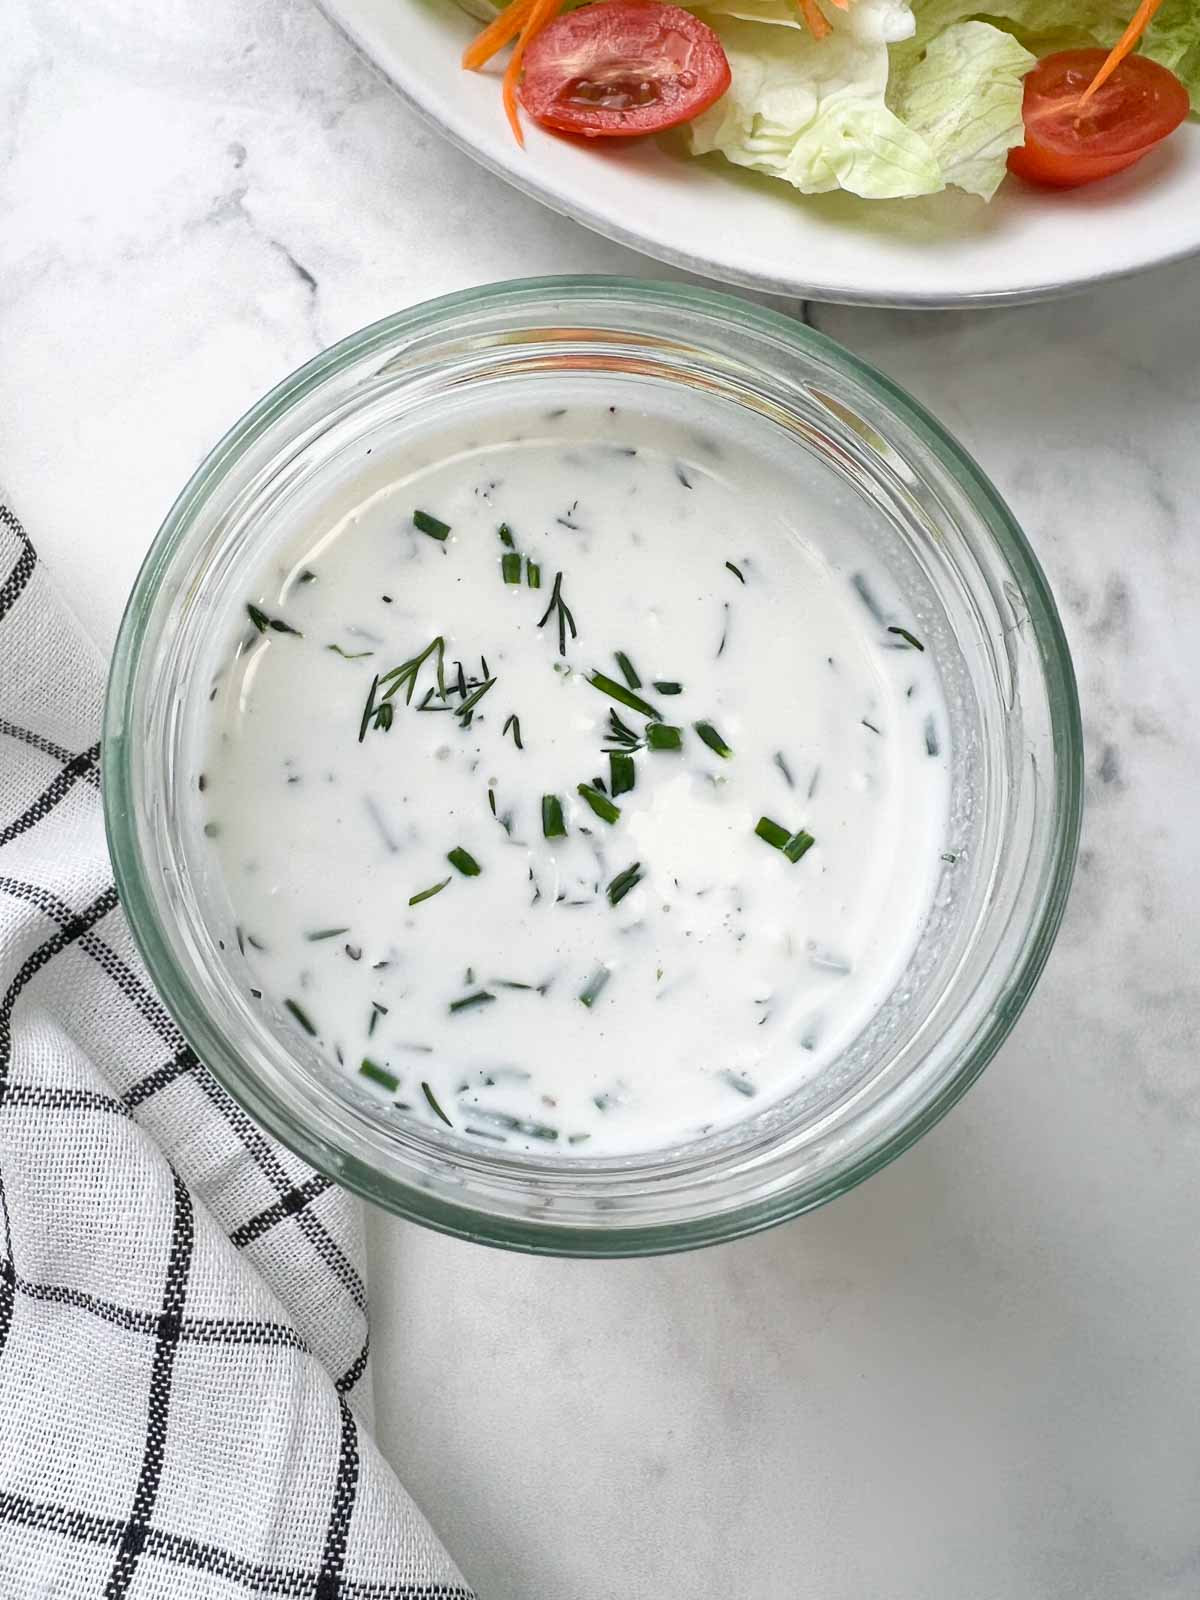 homemade ranch dressing/dip in a glass jar garnished with fresh herbs